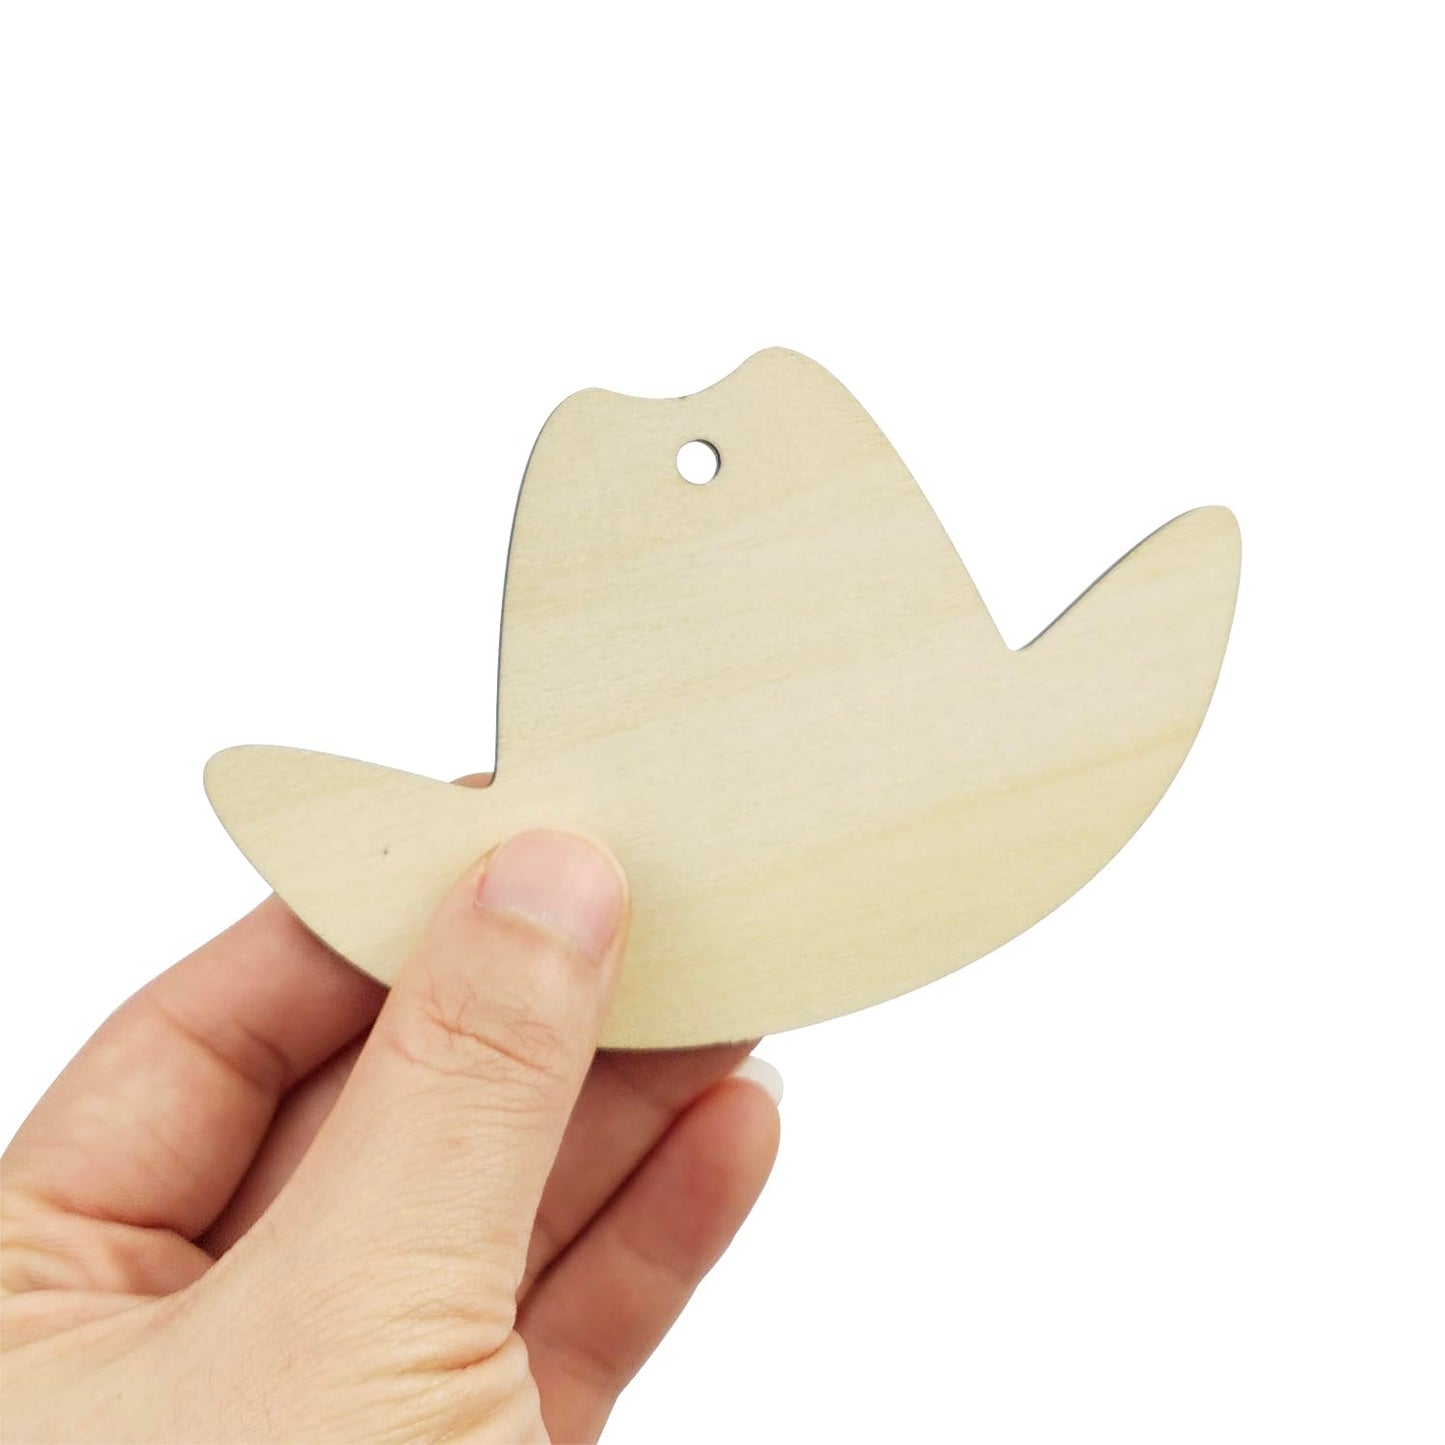 30 Pieces Wooden Cowboy Hat Tags Unfinished Wood Hanging Cowboy Hat Tags Natural Blank Wooden Hat Cutouts Labels DIY Wooden Cowboy Hat Tags with